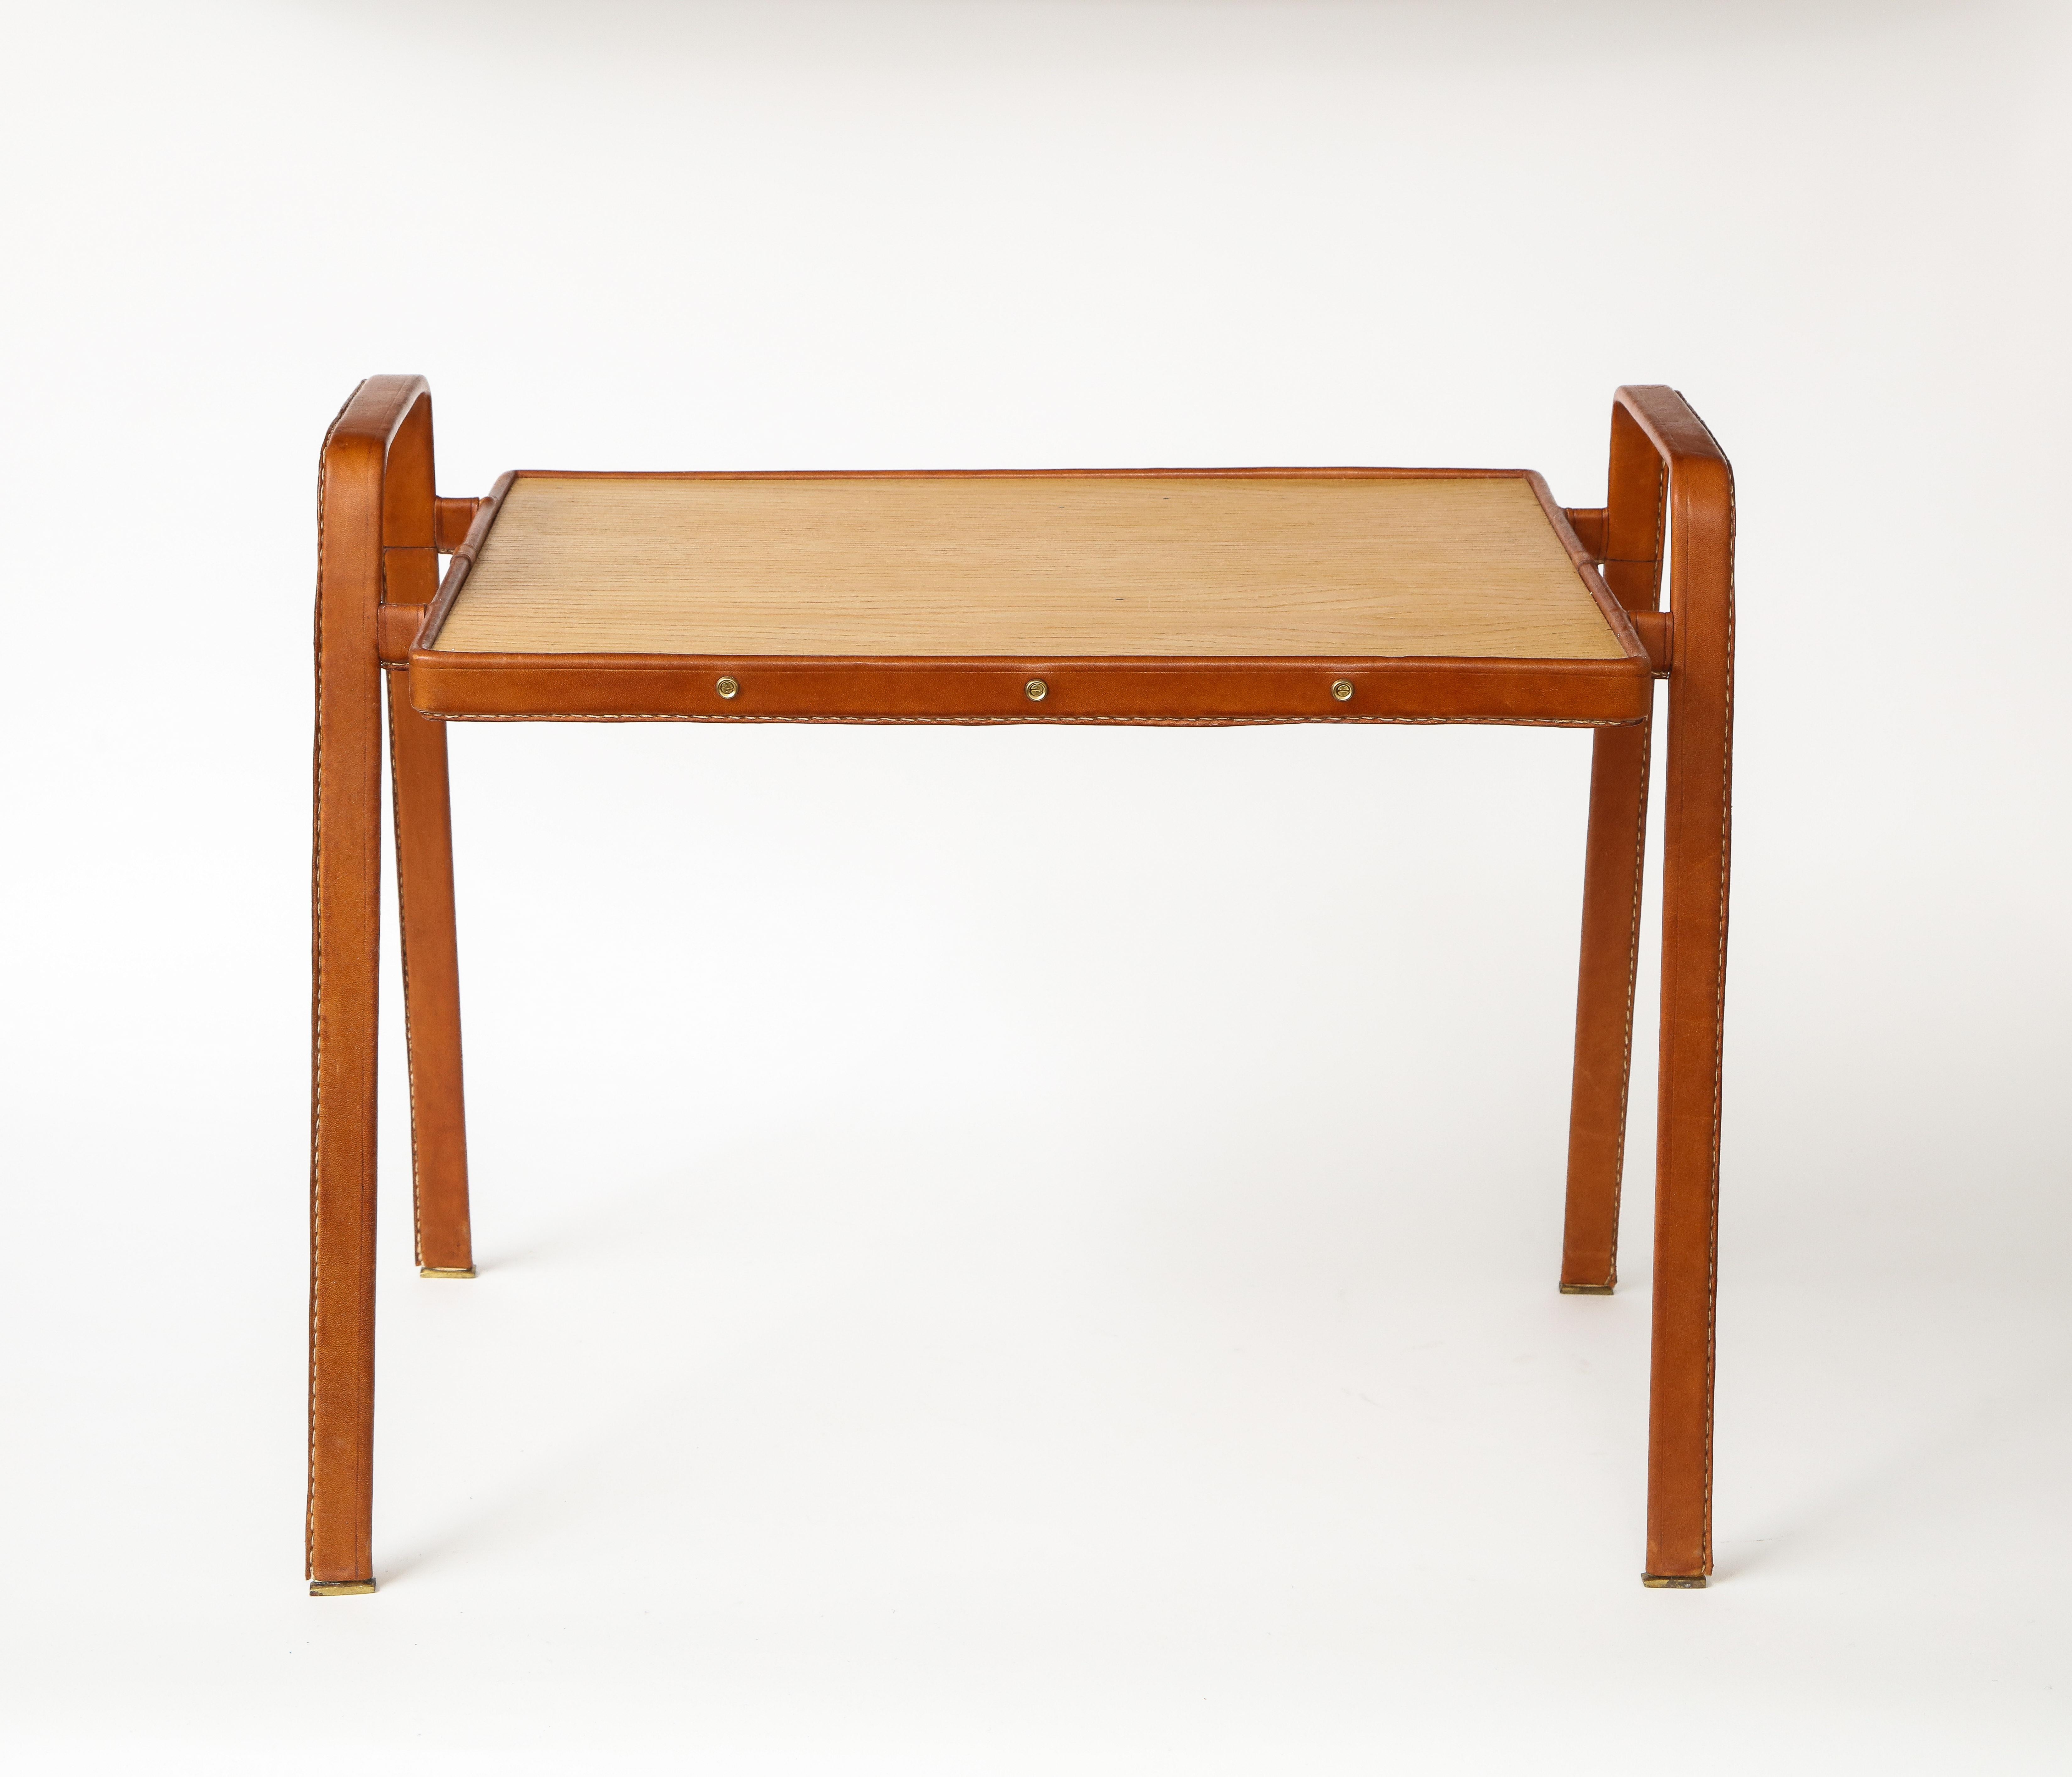 French Leather Stitched Side Table by Jacques Adnet, c. 1950 For Sale